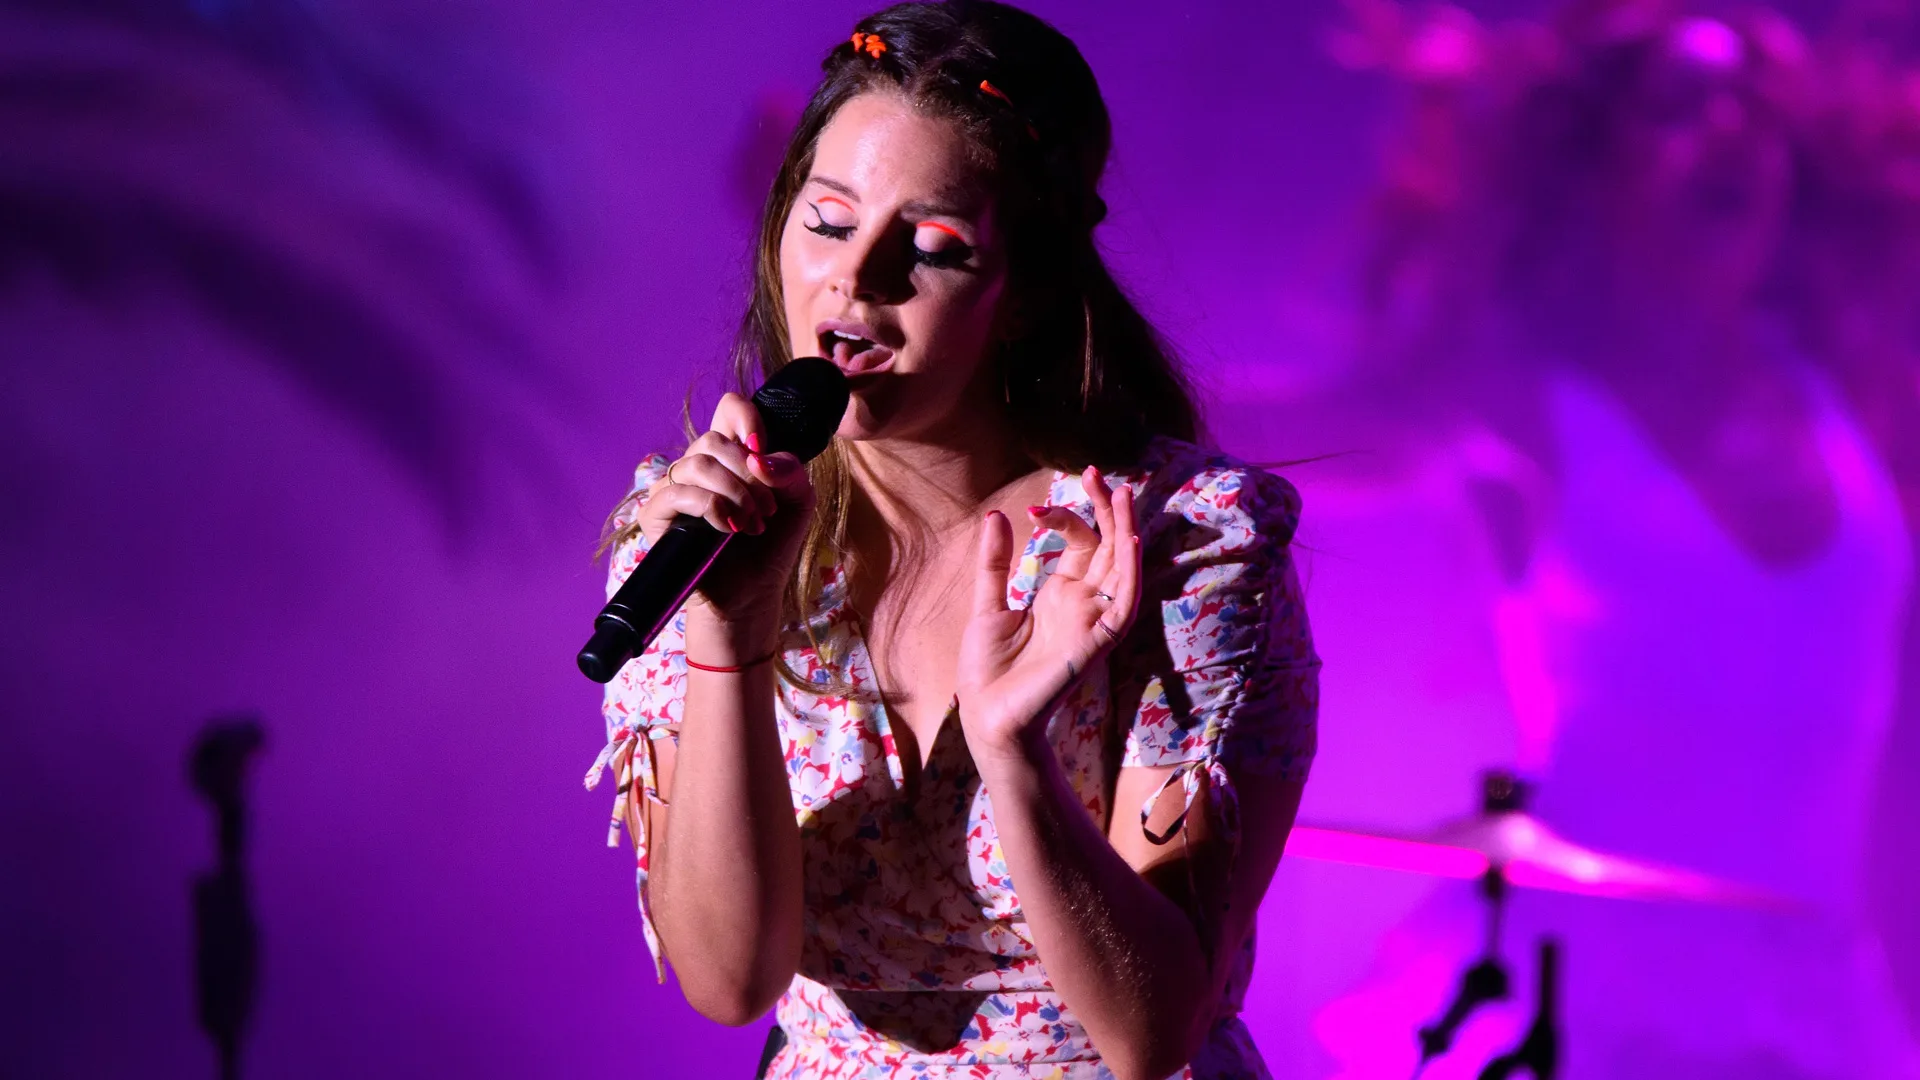 A photograph of Lana Del Ray singing on stage in a floral dress against a purple pink lit background